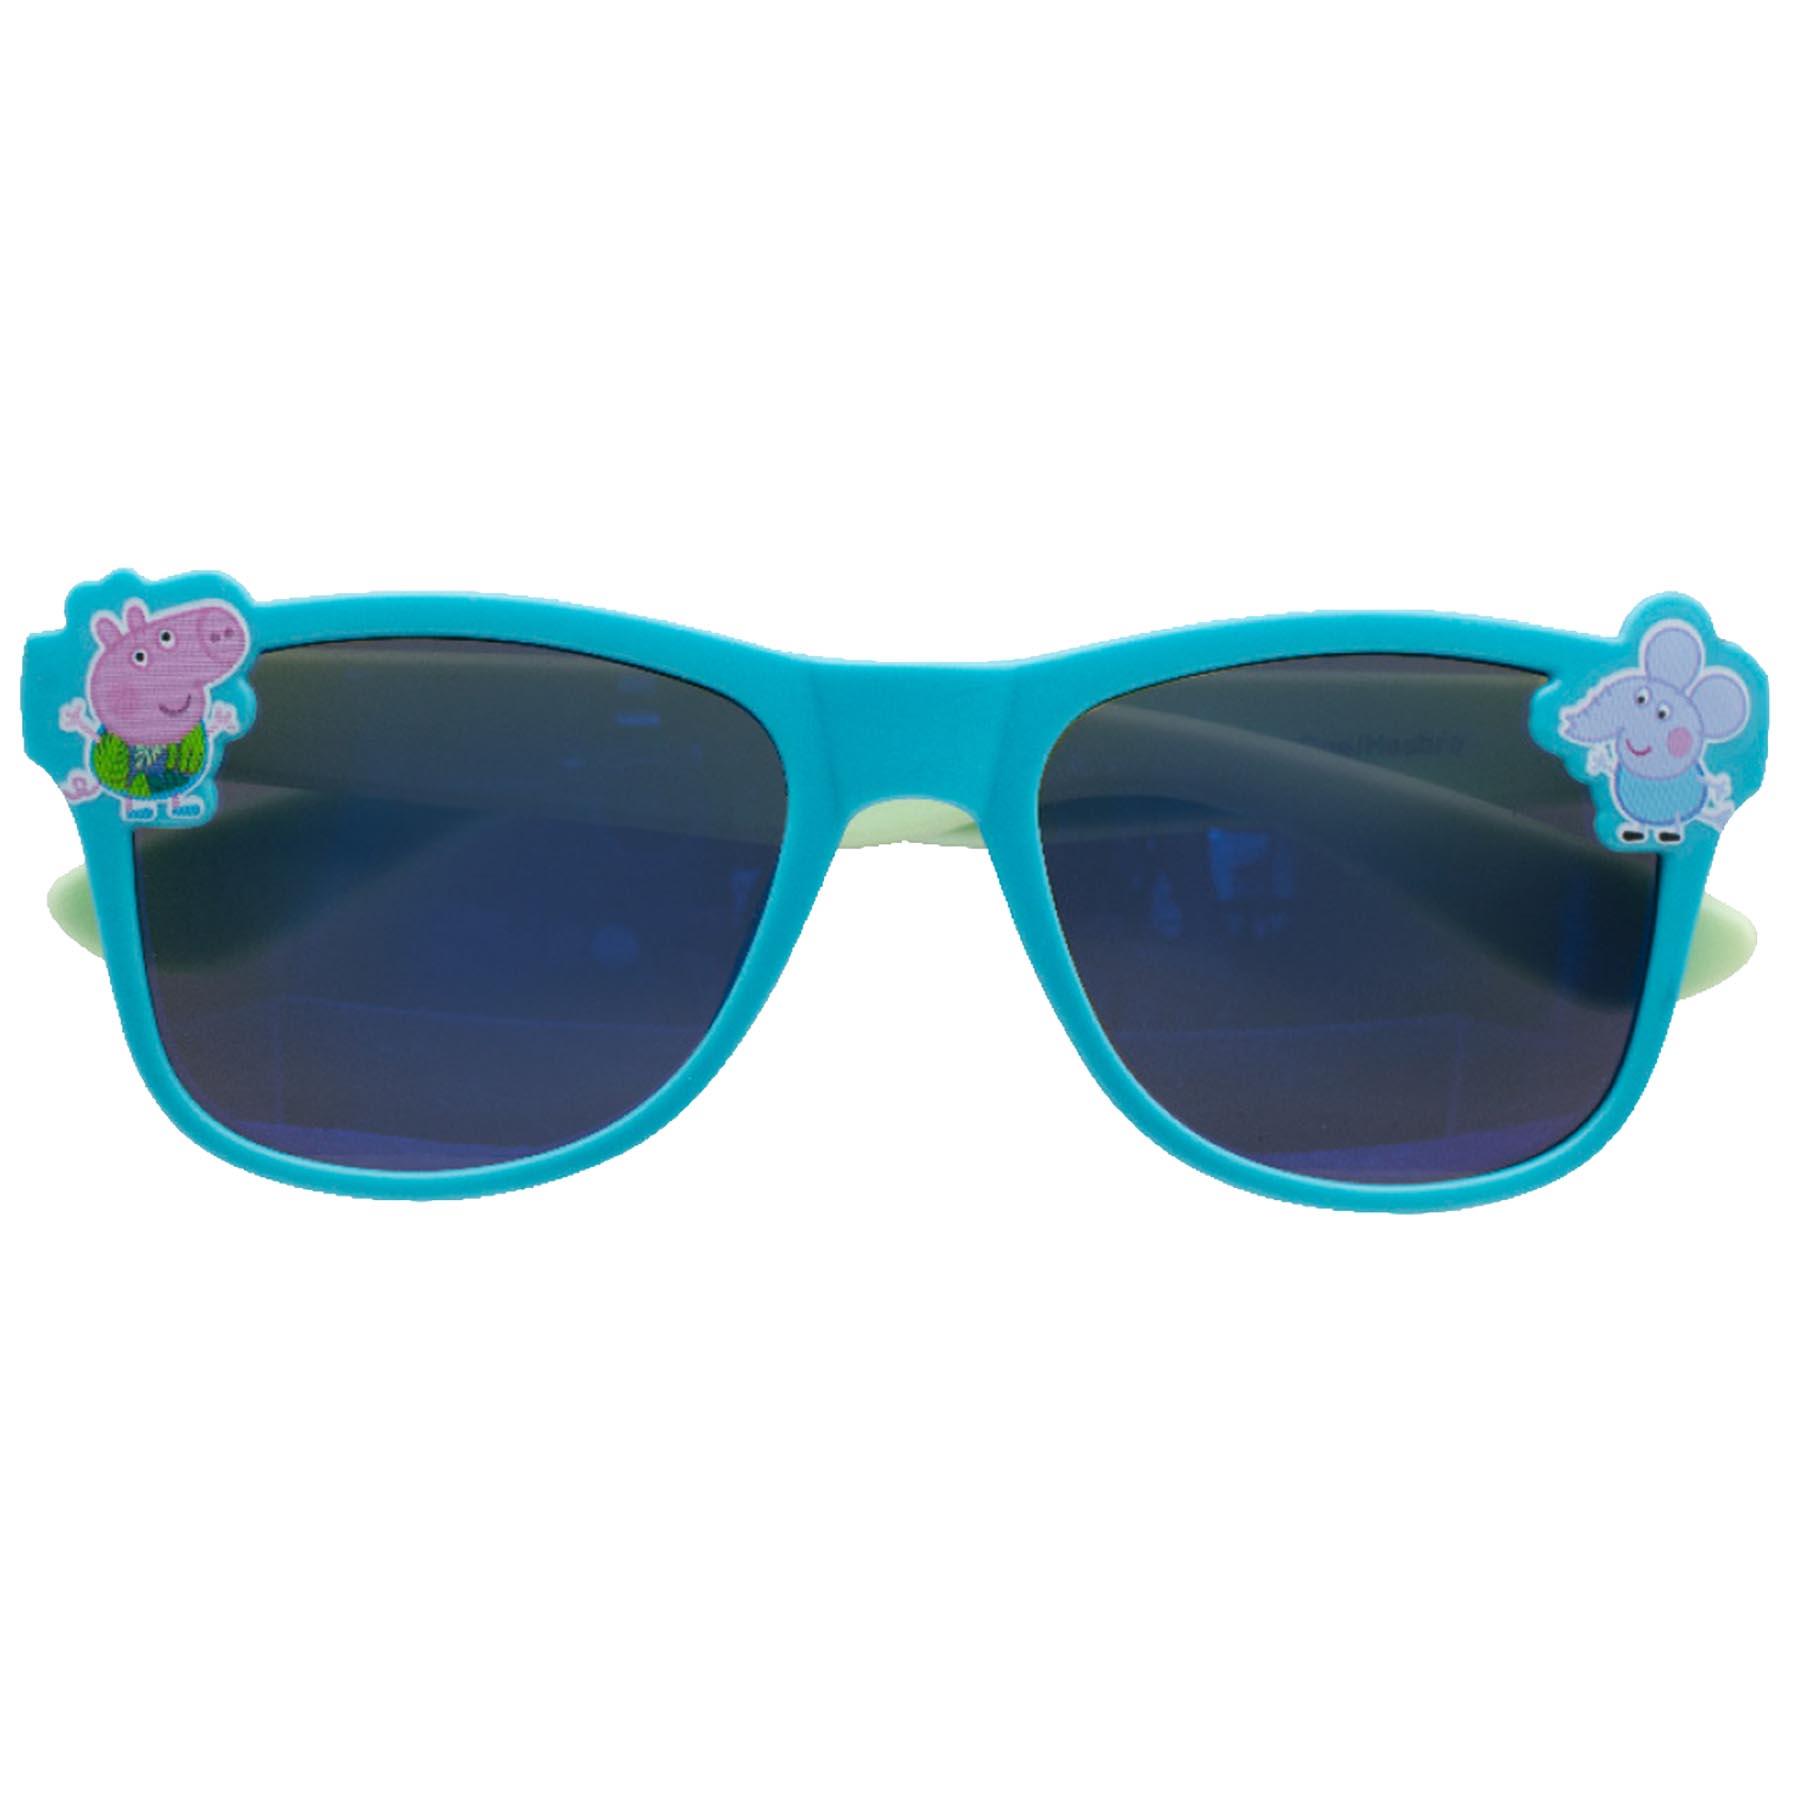 Peppa Pig Children's Character Sunglasses UV protection for Holiday - GEORGE12